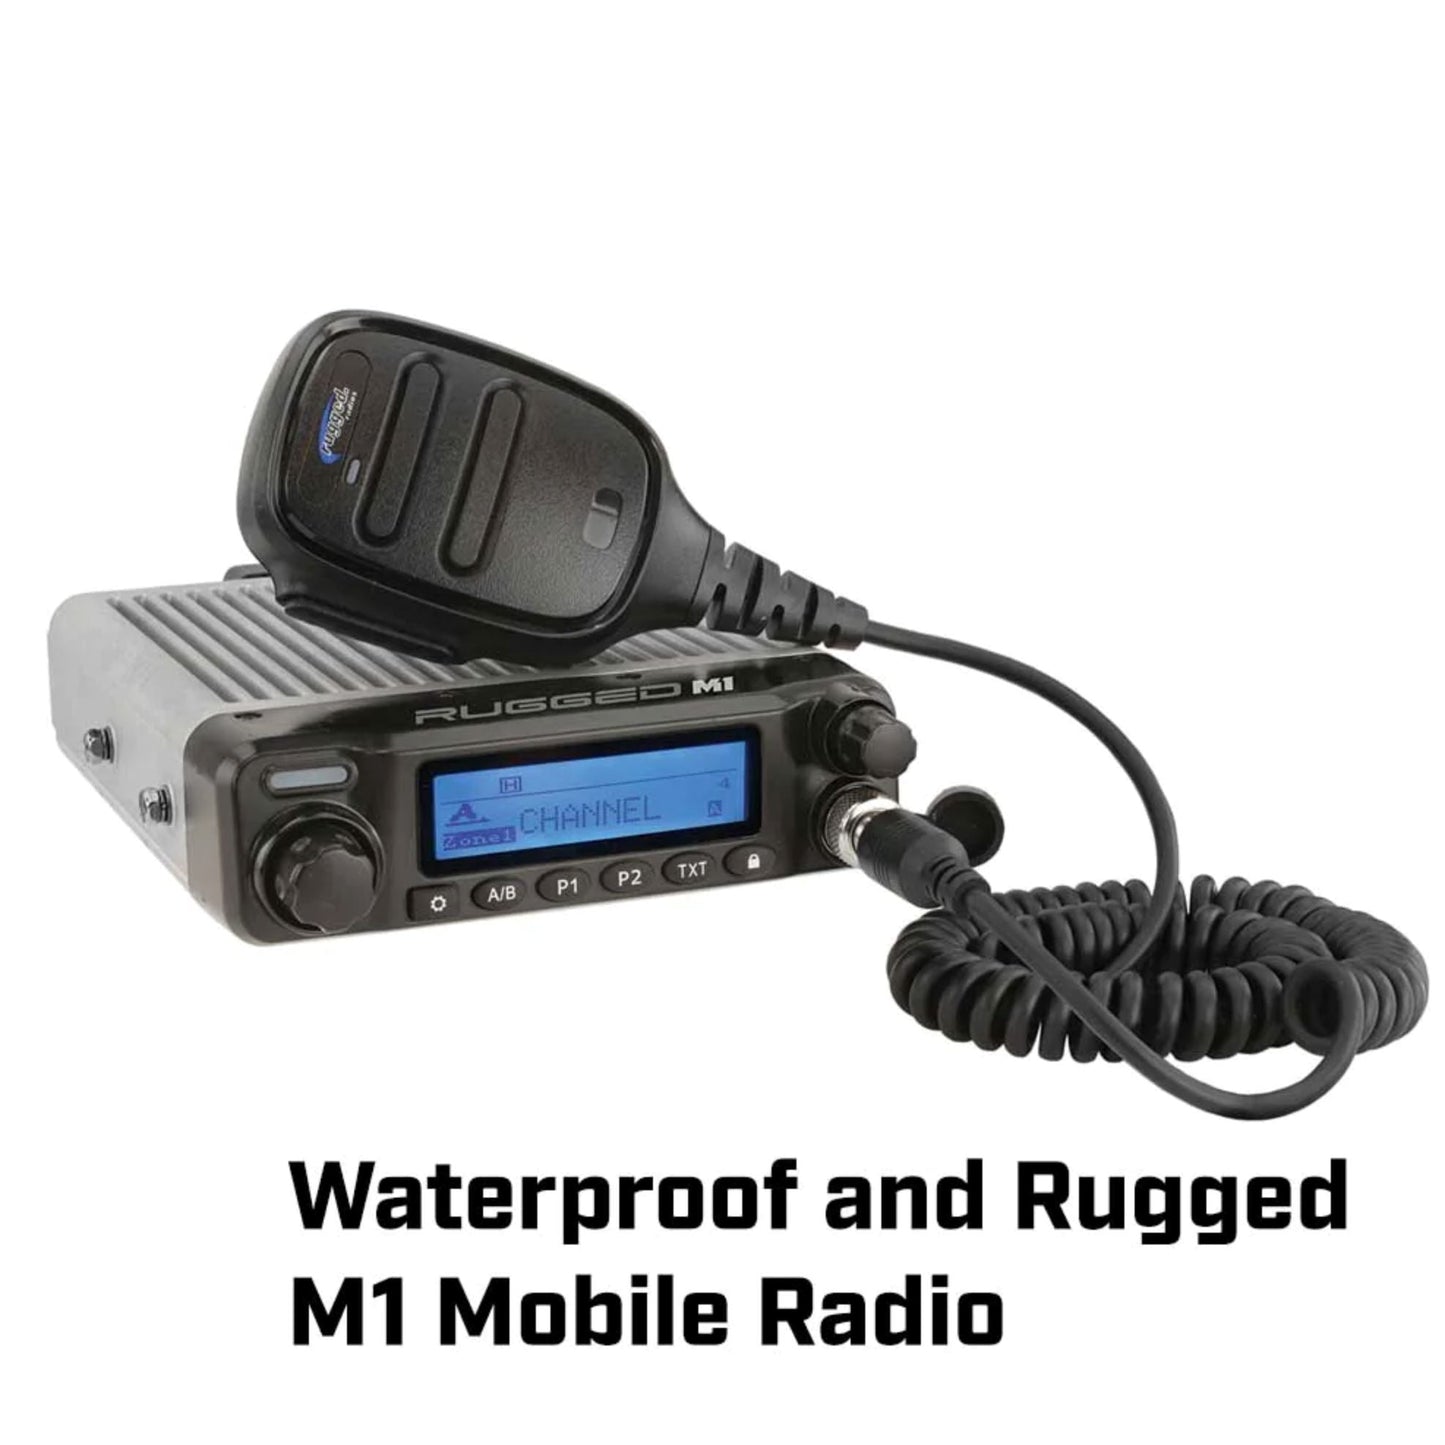 Rugged Radios 2 Person - STX STEREO Complete Communication Intercom System - with STX STEREO Helmet Kits